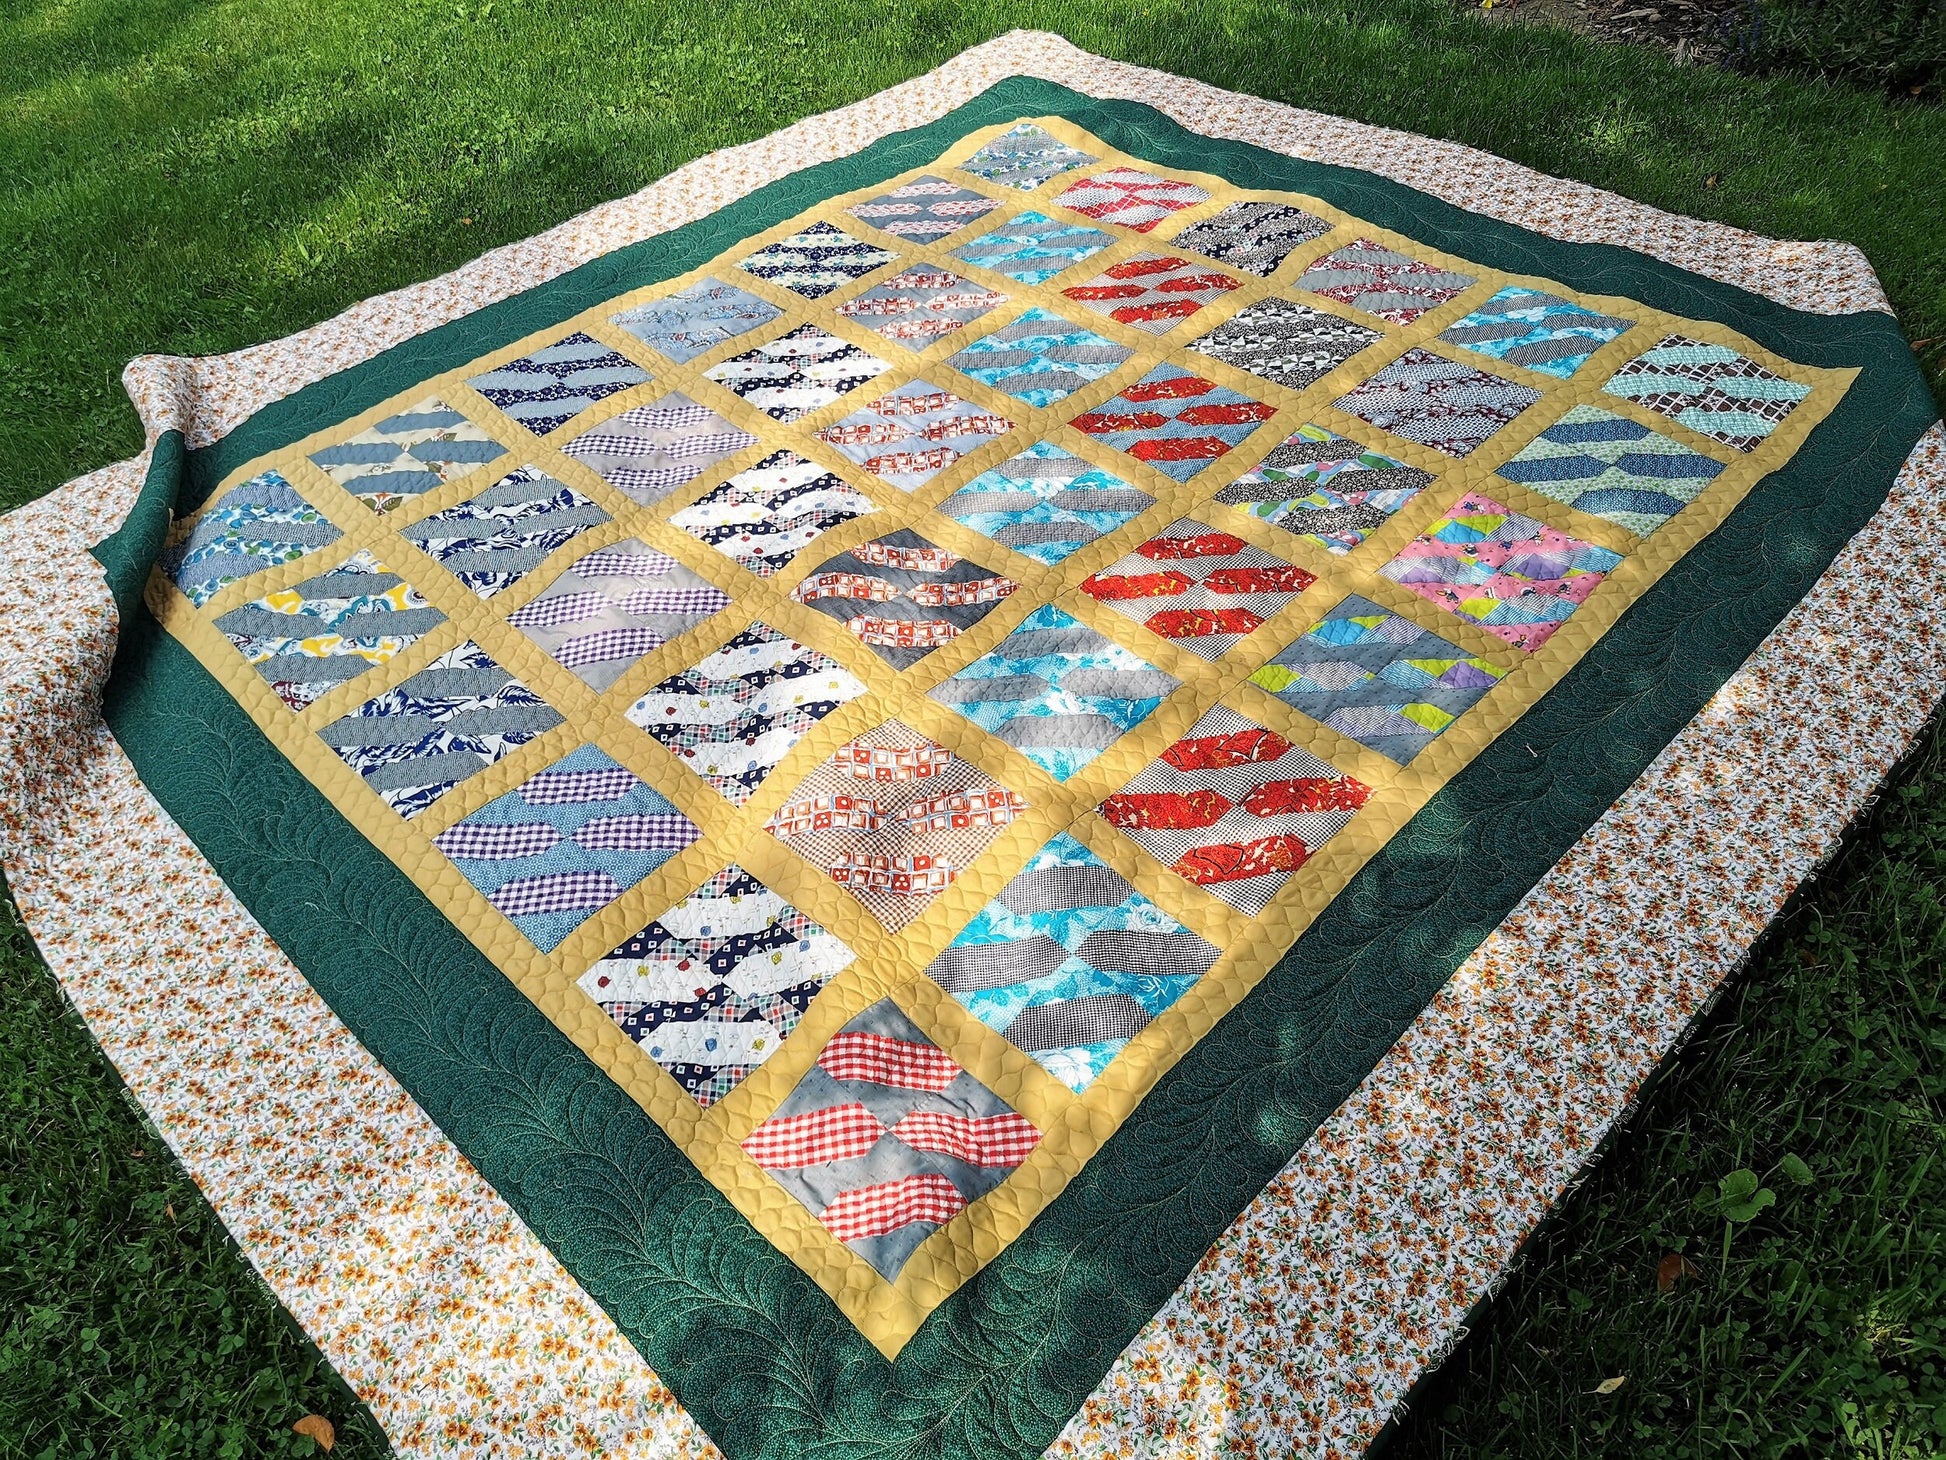 vintage queen quilt shown outdoors on the grass, in dappled shade